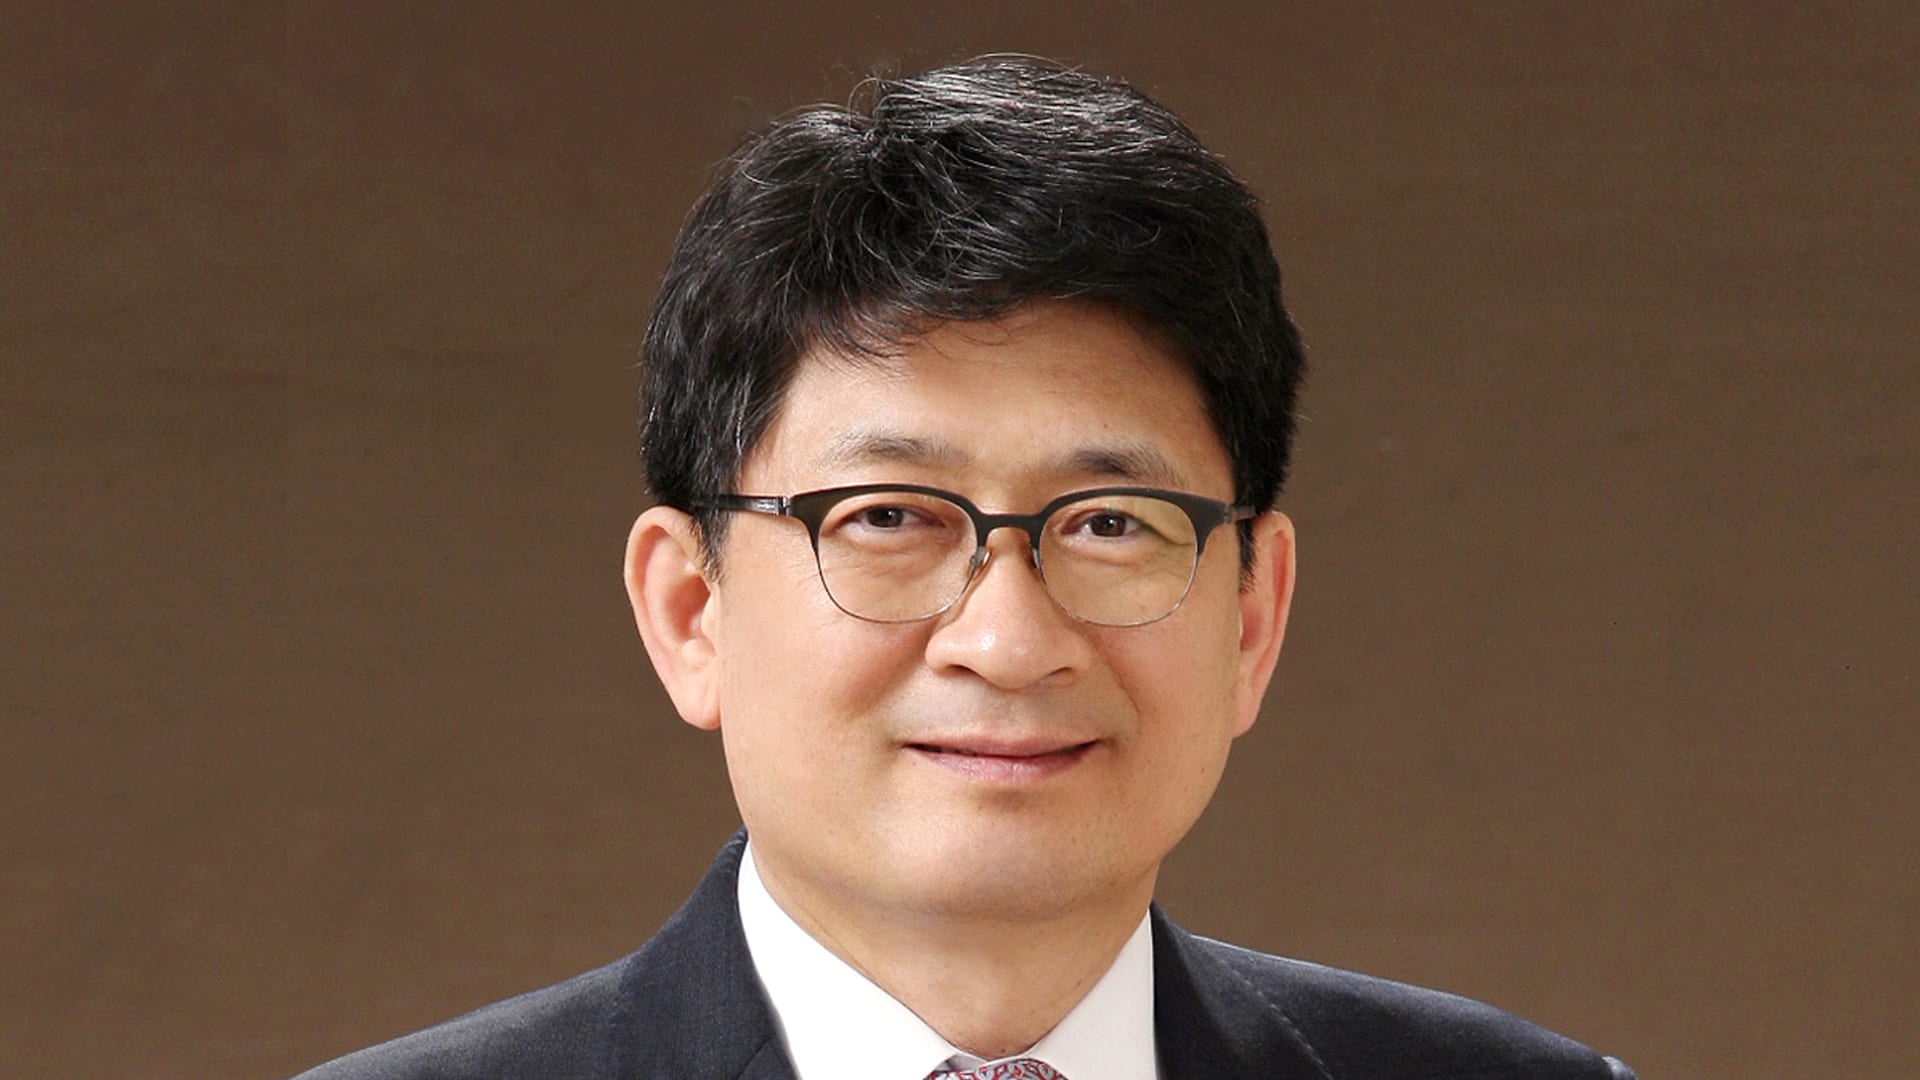 Coex CEO Dongwon Lee Appointed Korea Exhibition Association Chief - Coex